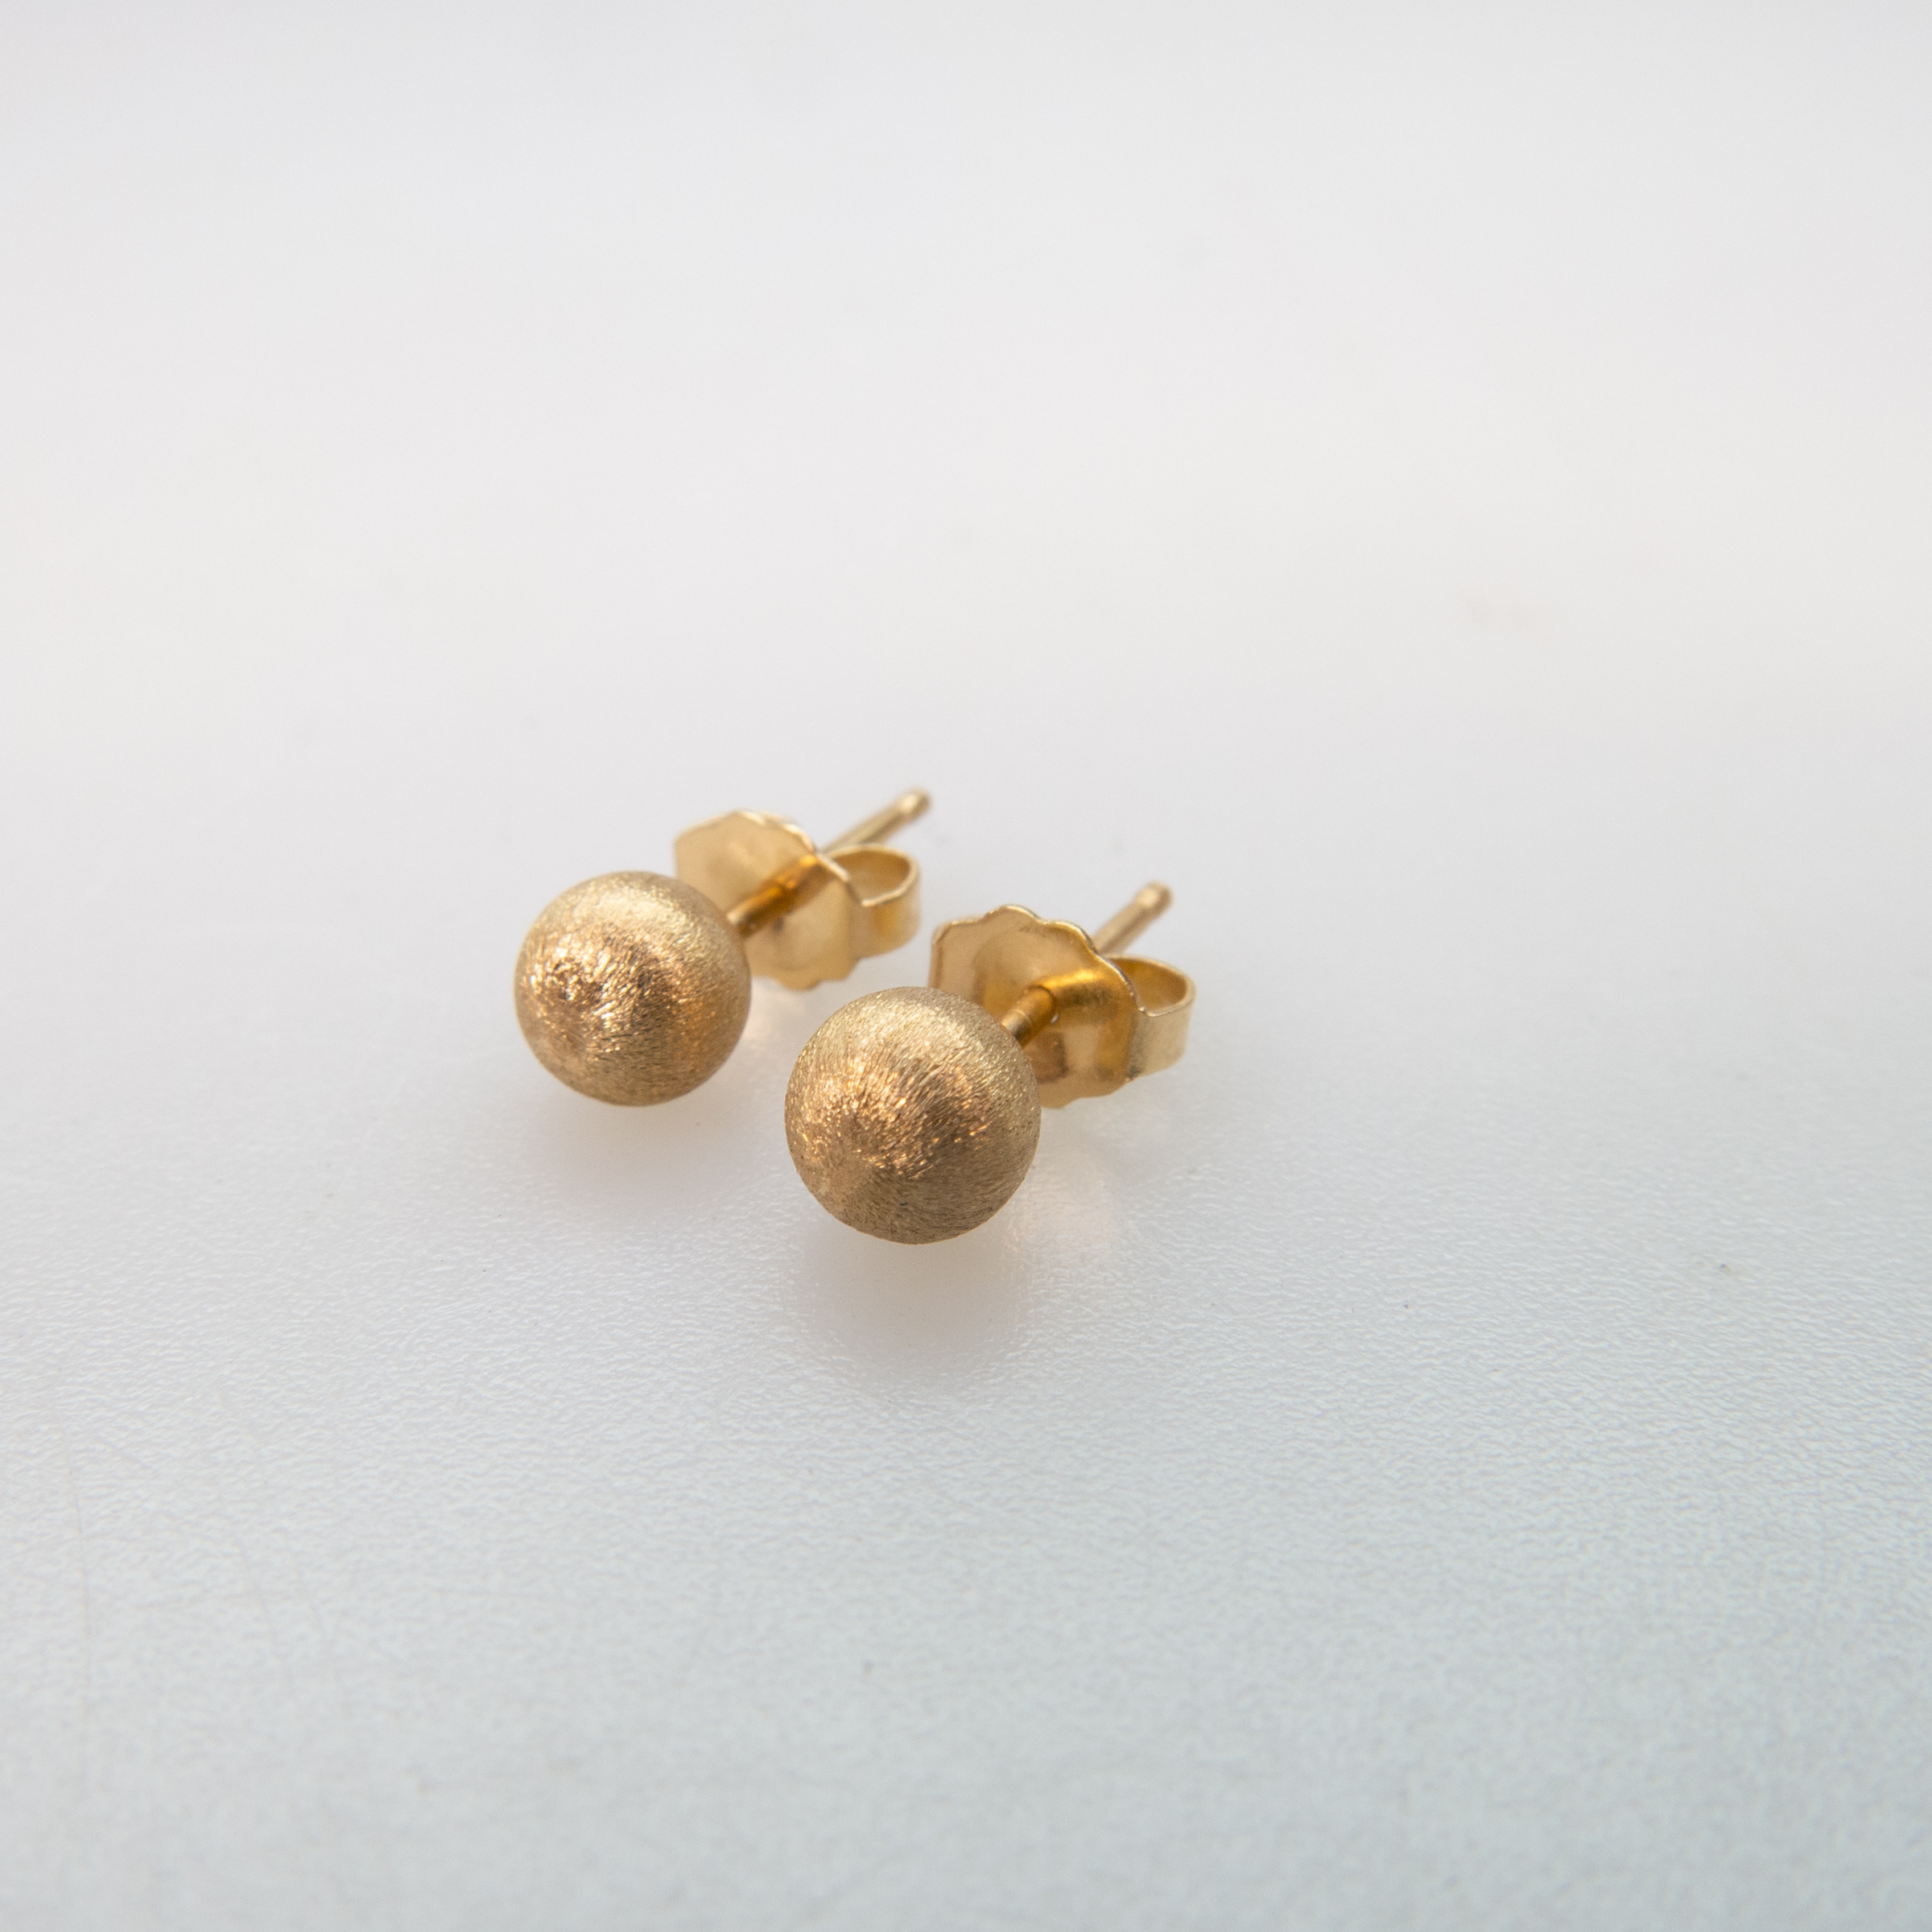 35 x Pairs Of 14k Yellow Gold Stud Earrings